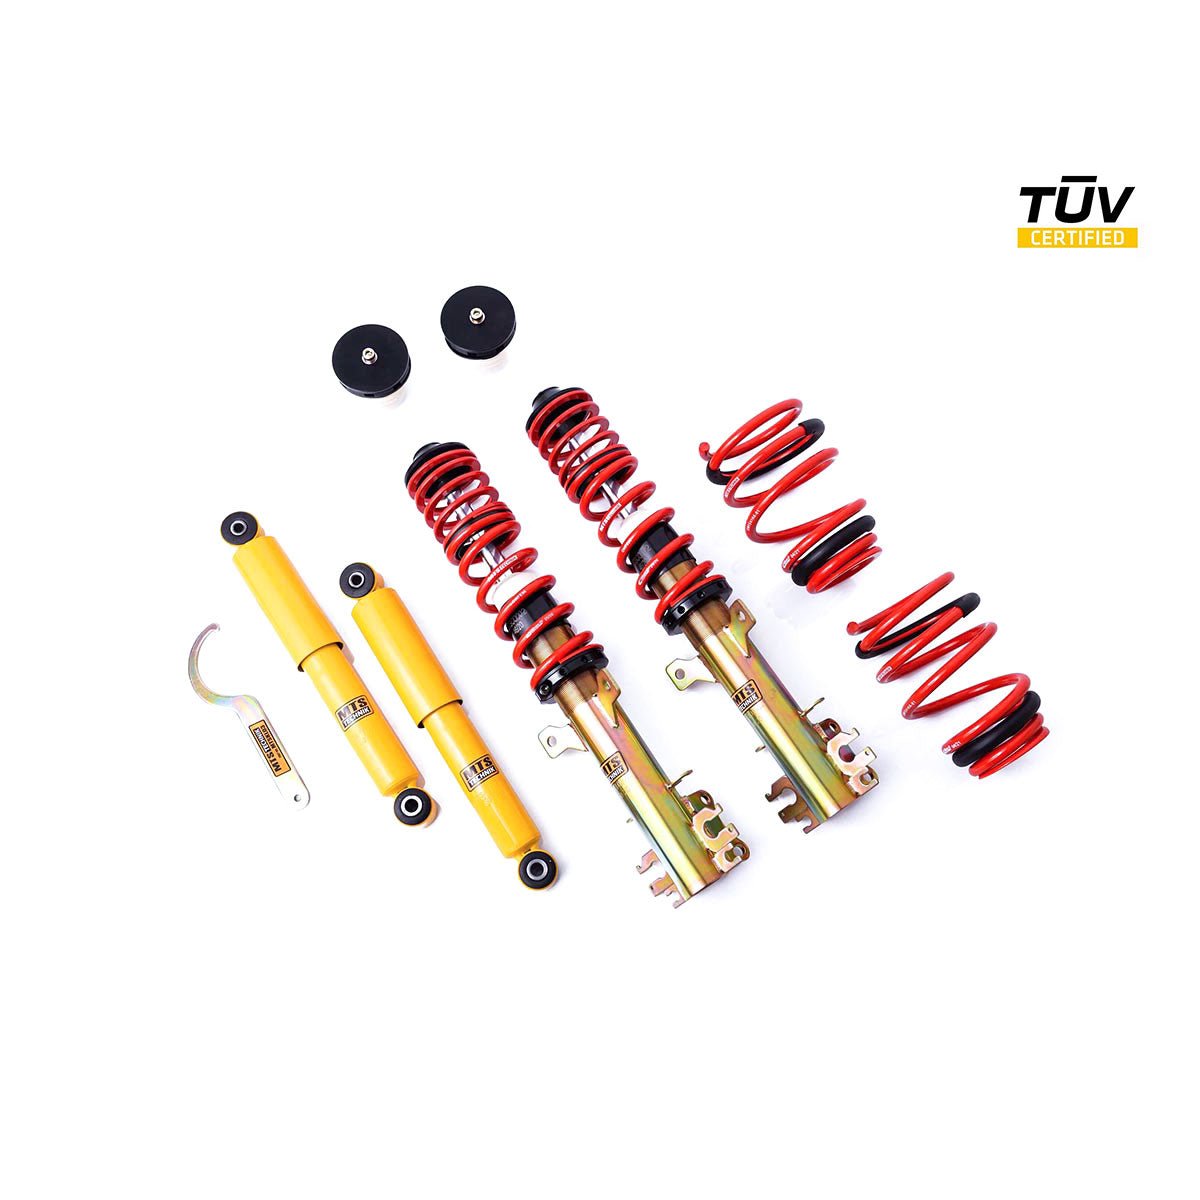 MTS TECHNIK coilover kit SPORT Fiat 500 (with TÜV) - PARTS33 GmbH